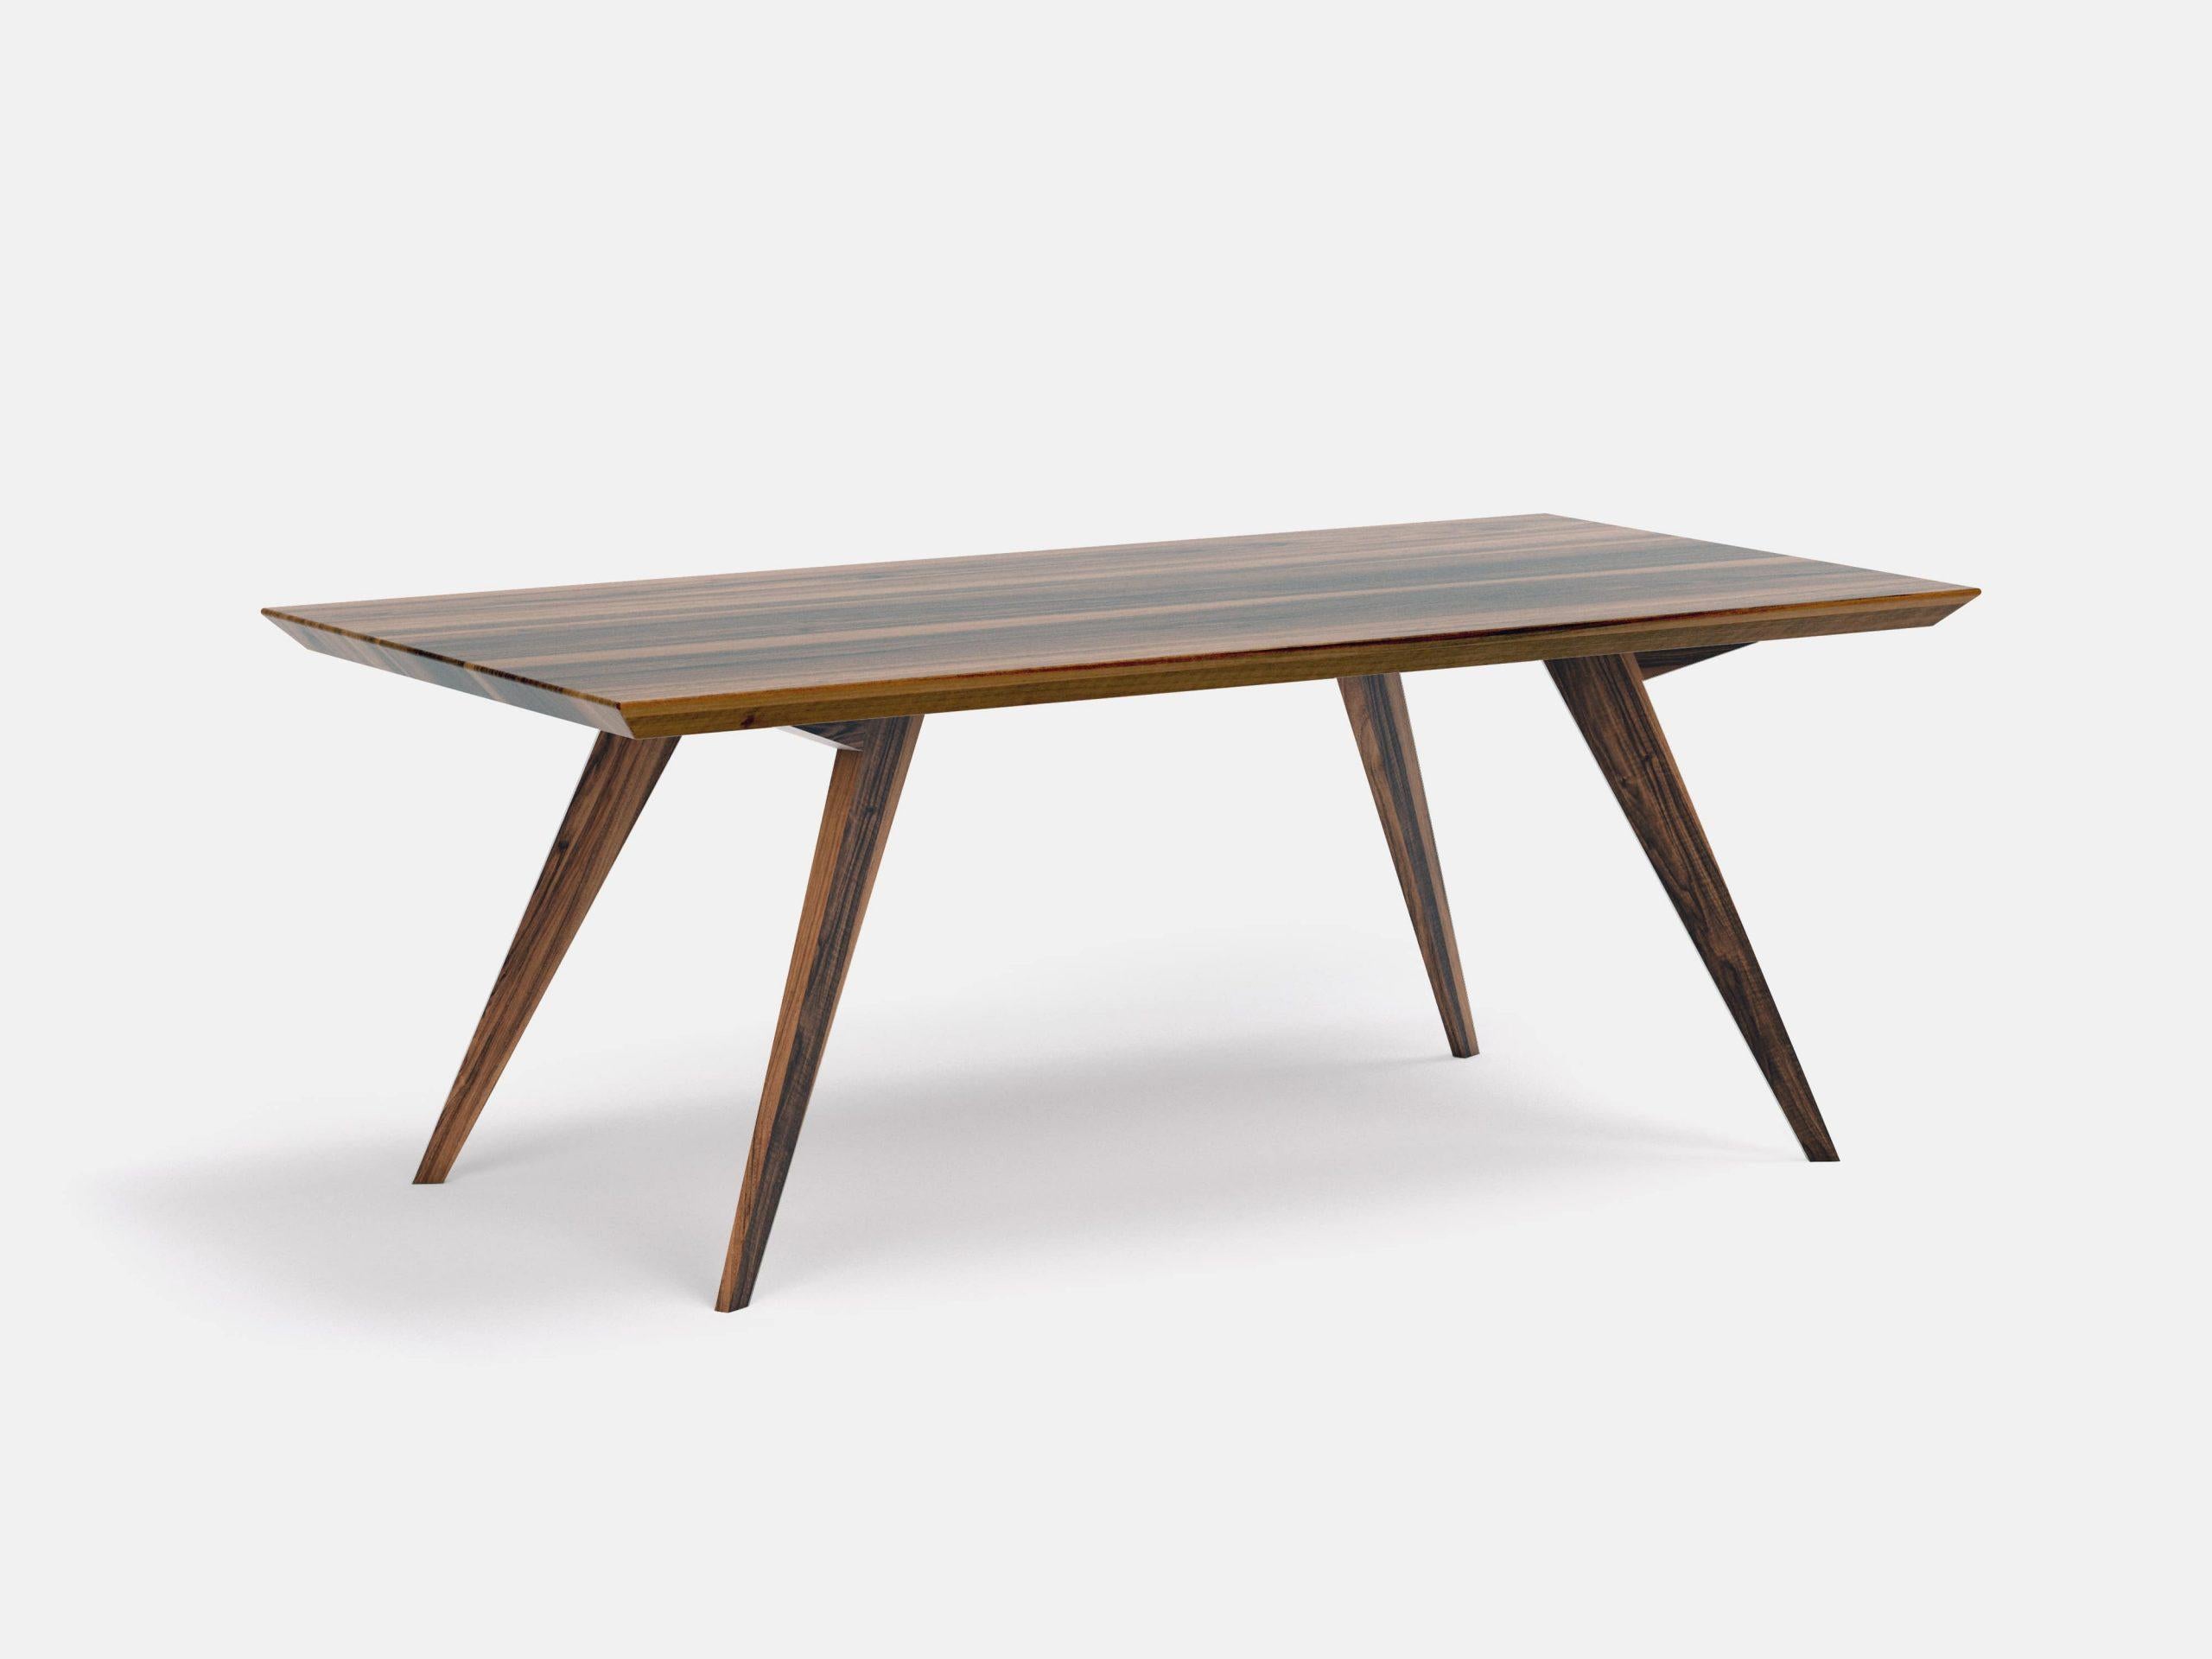 Walnut Minimalist 250 dining table
Dimensions: W 250 x D 100 x H 75 cm
Materials: American walnut 100% solid wood


 

Roly-Poly table is the proof that through design we can create lightness and simplicity even when the products are